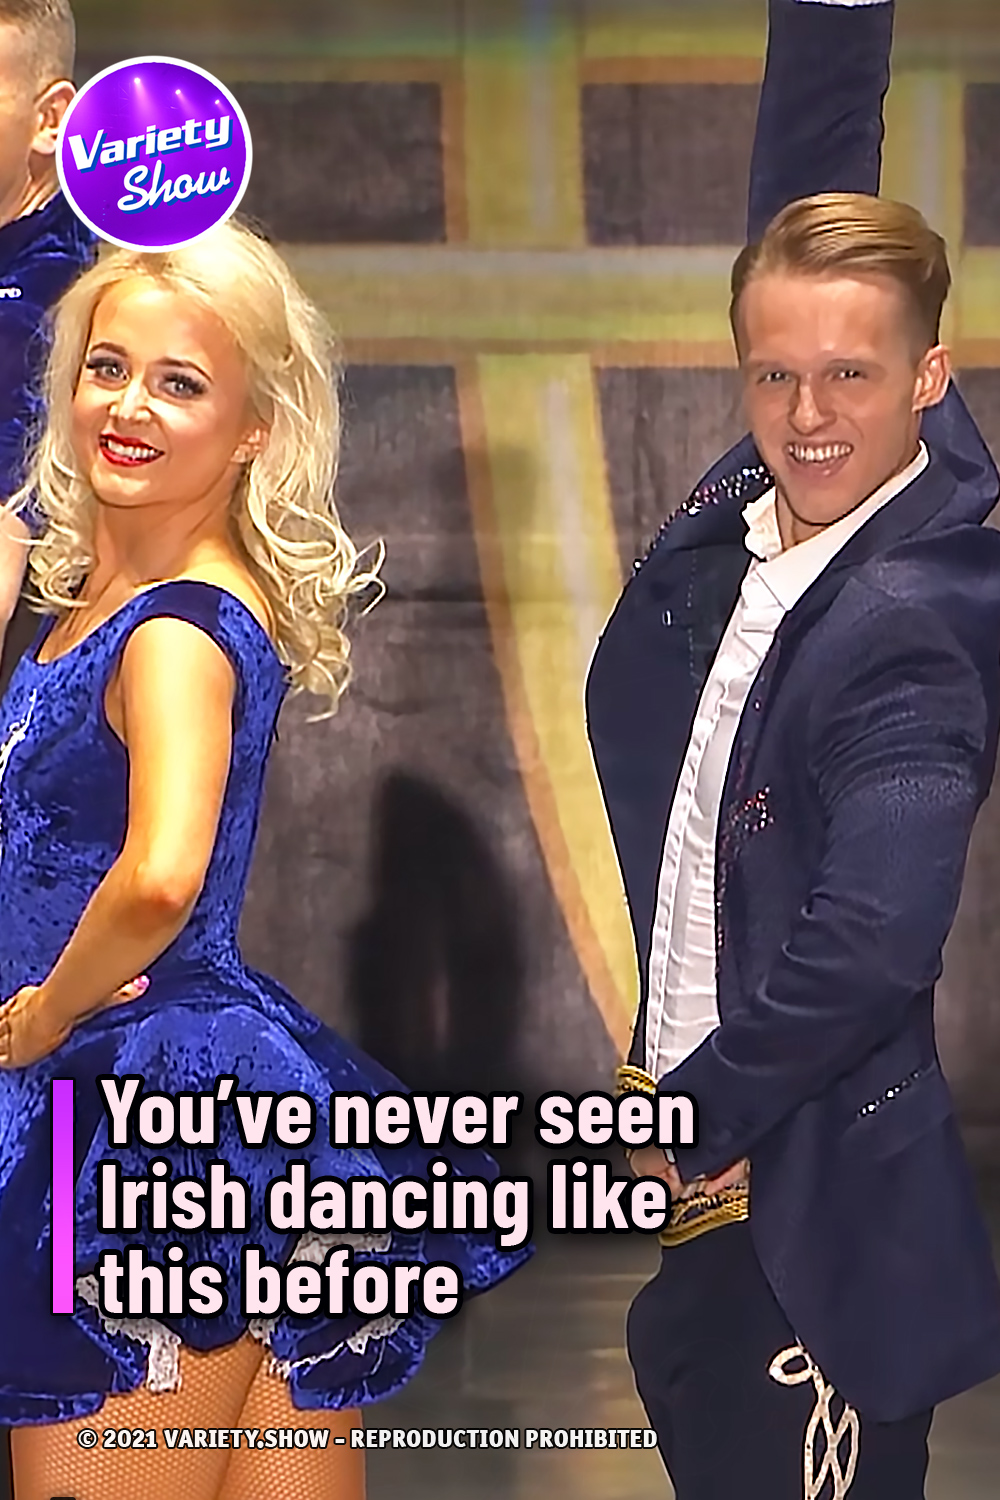 You’ve never seen Irish dancing like this before